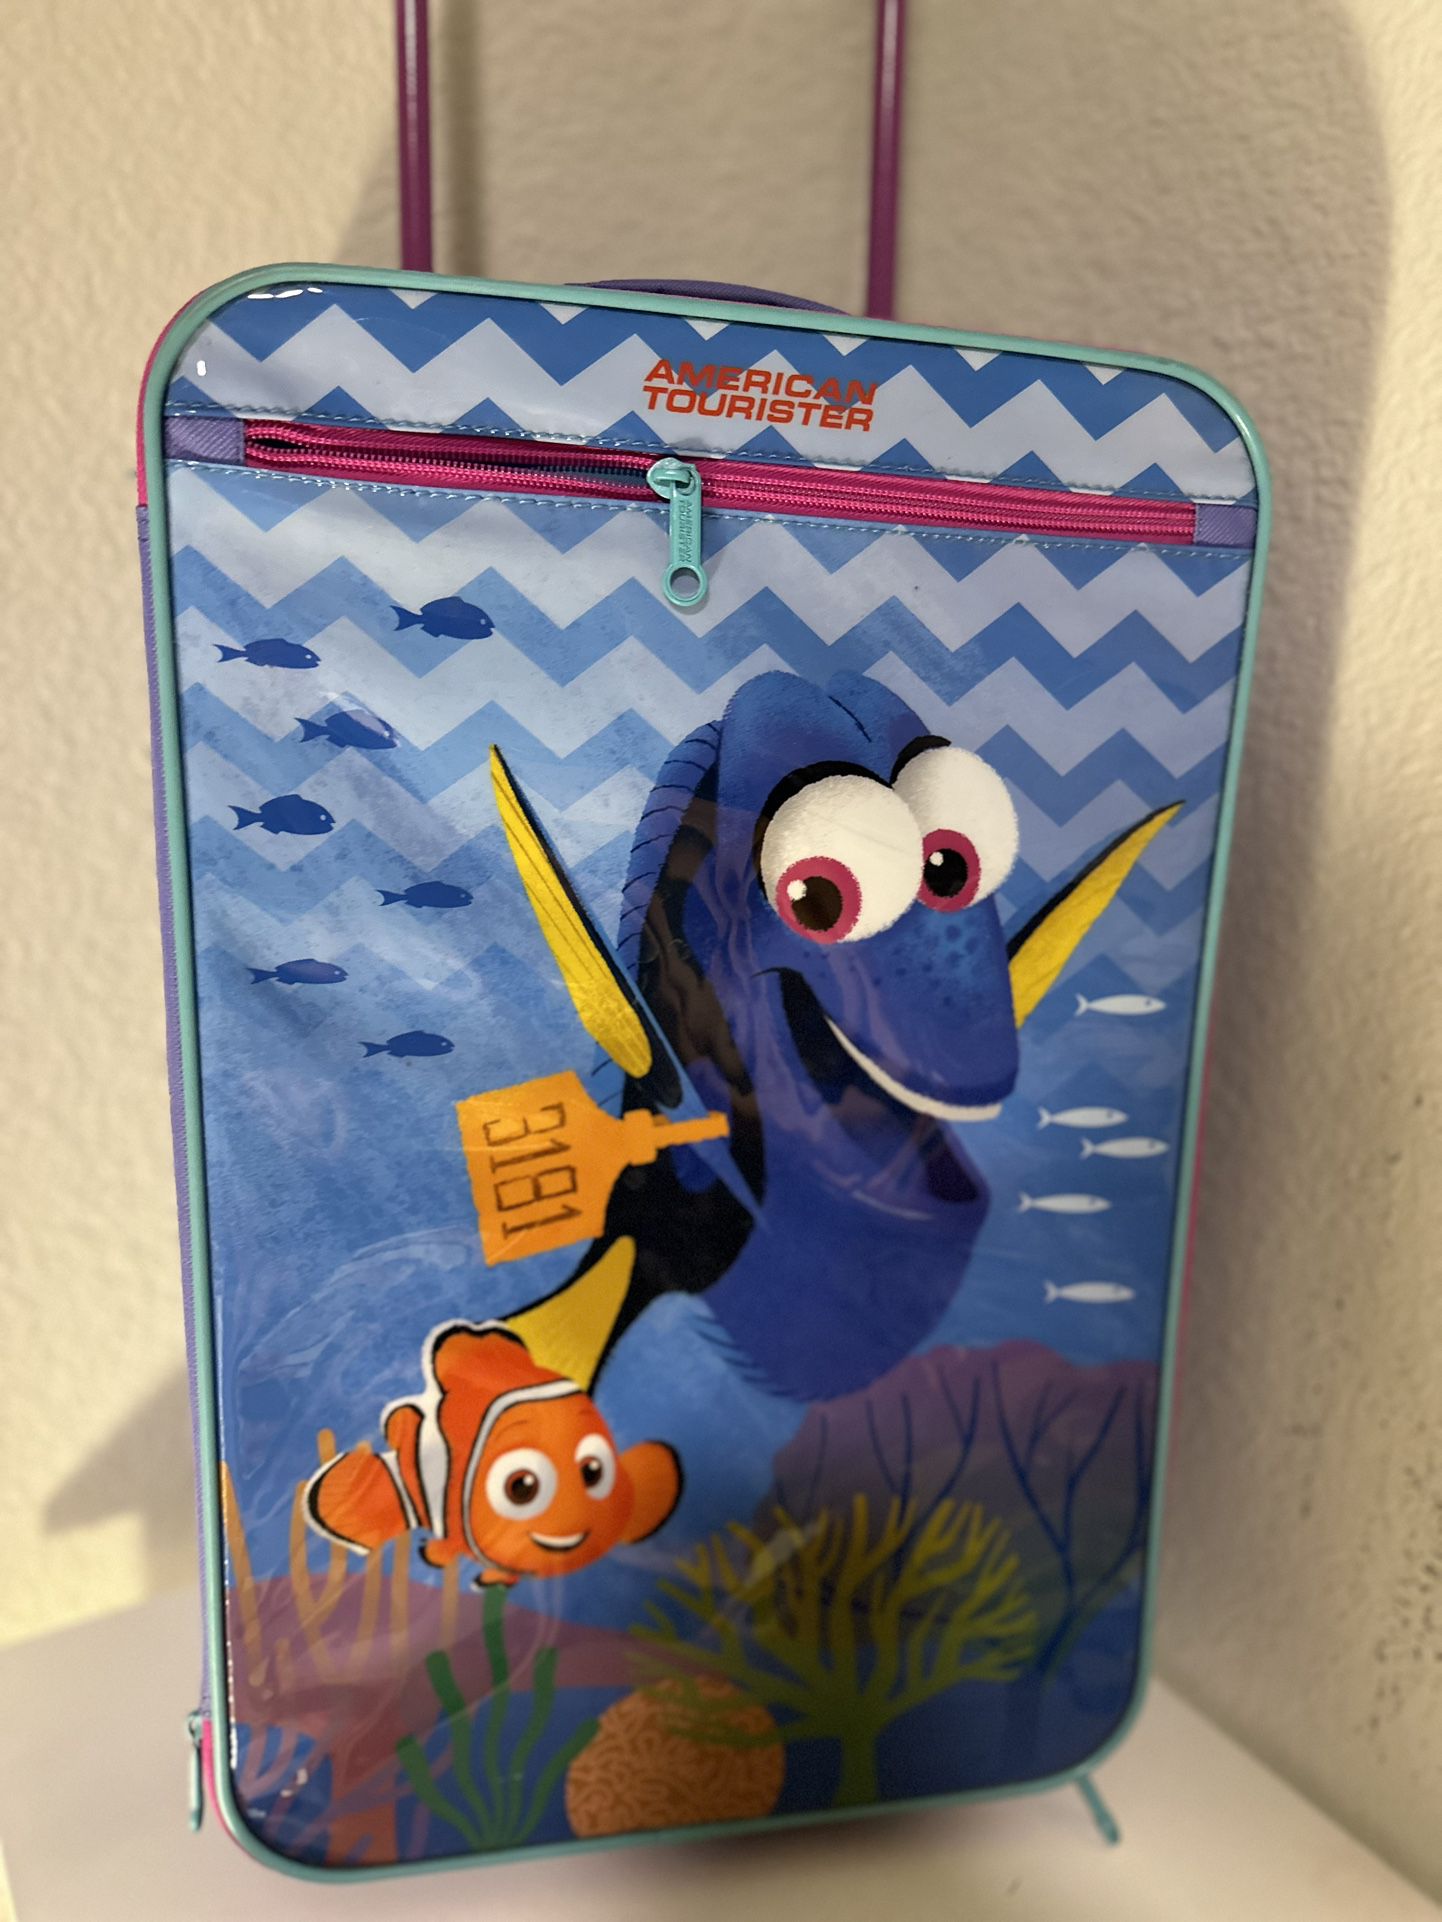 Finding Nemo Rolling Luggage In Good Condition Nothing Torn Or Broken 